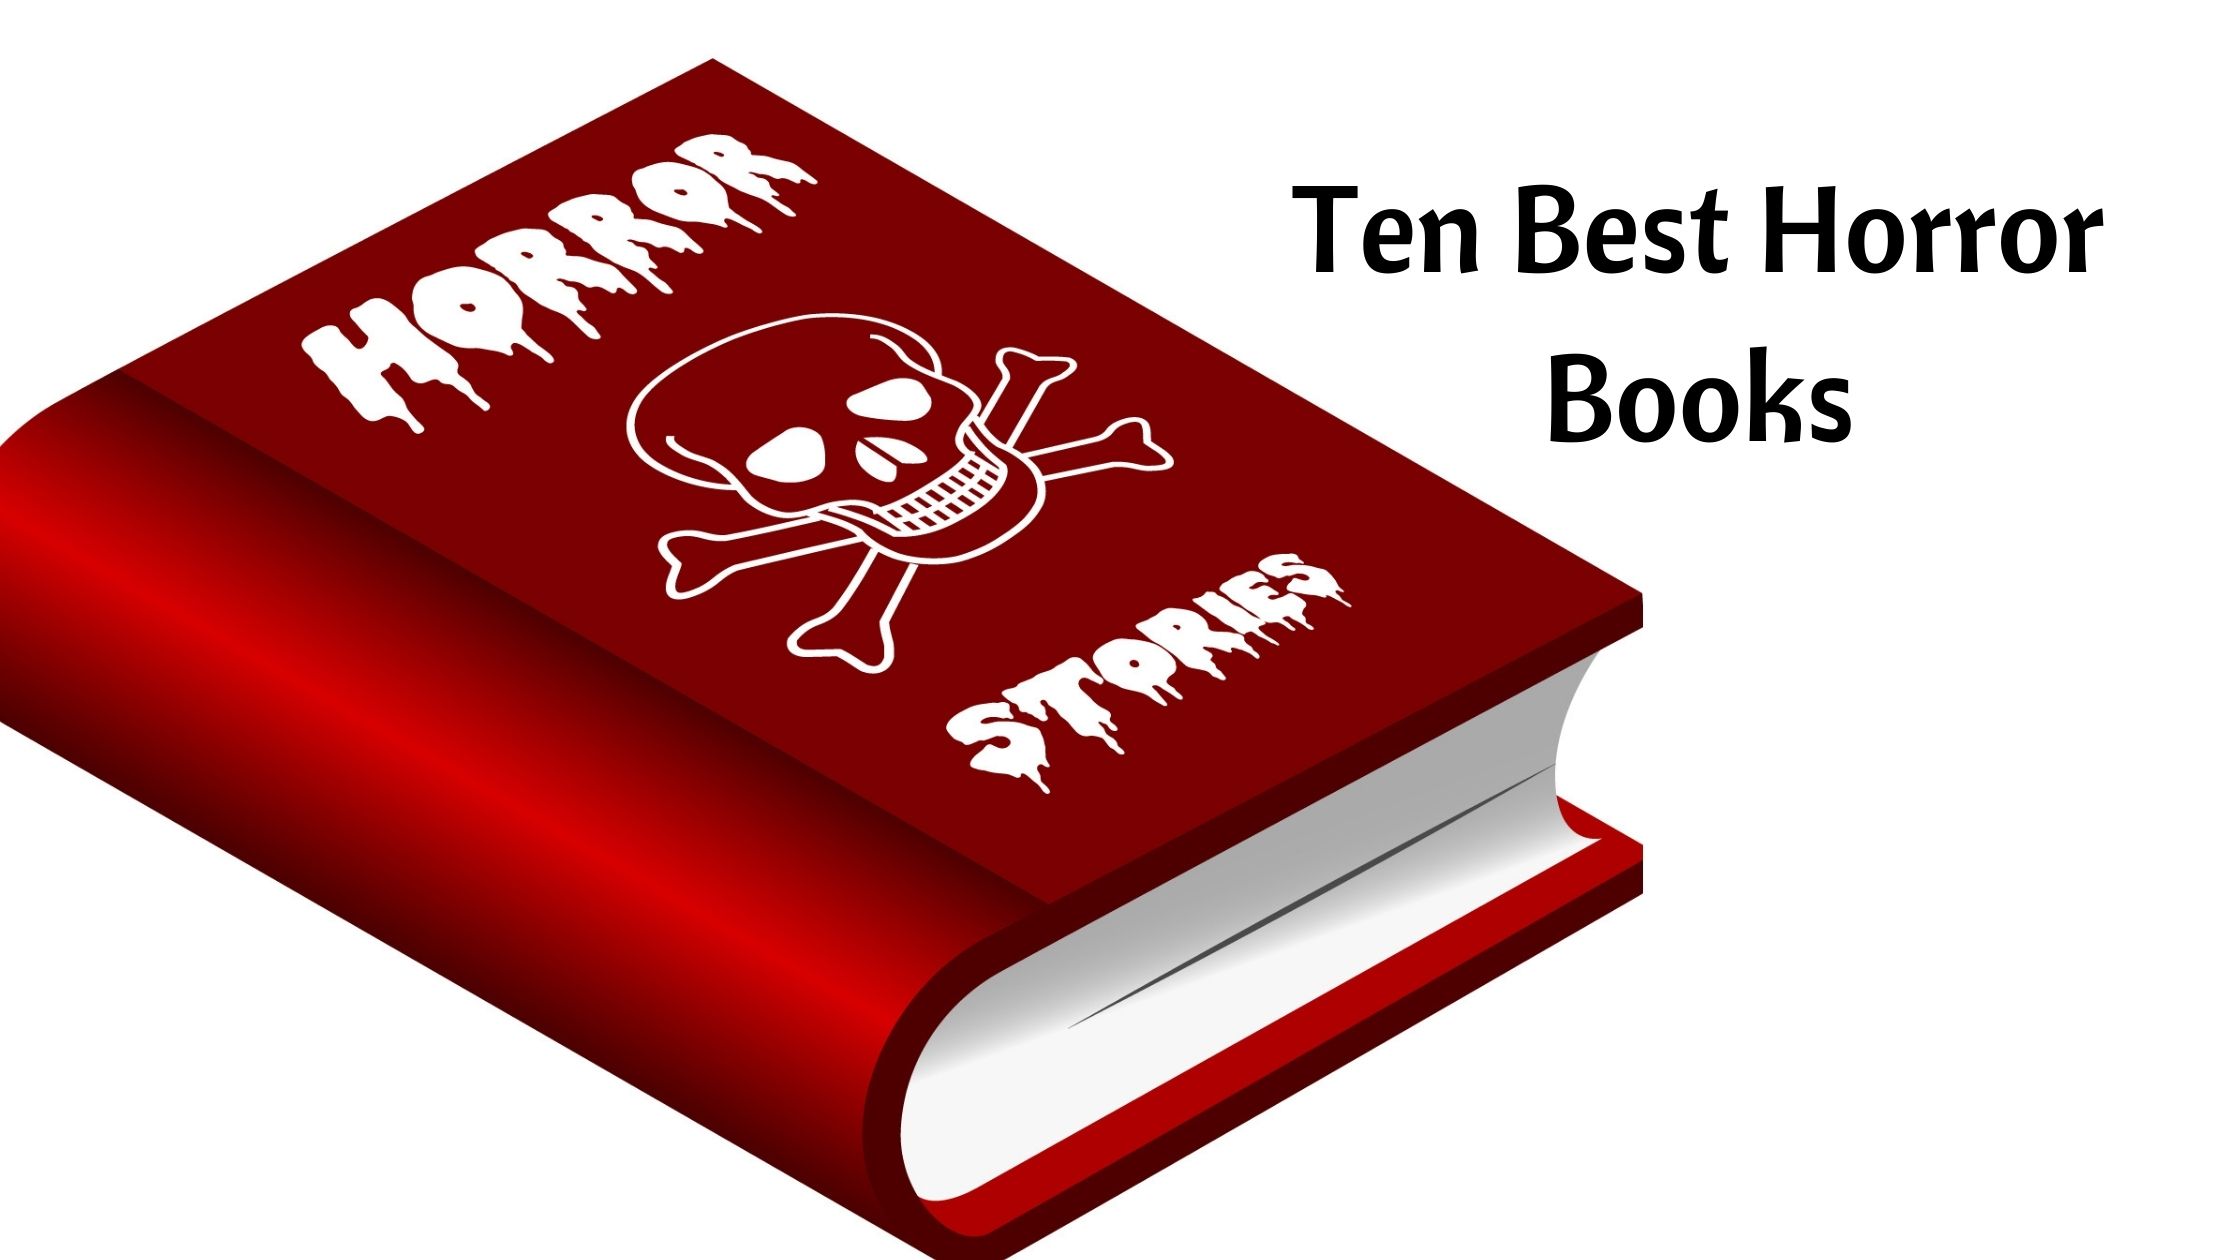 Ten Best Horror Books of All Time For Your Best Horror Experience